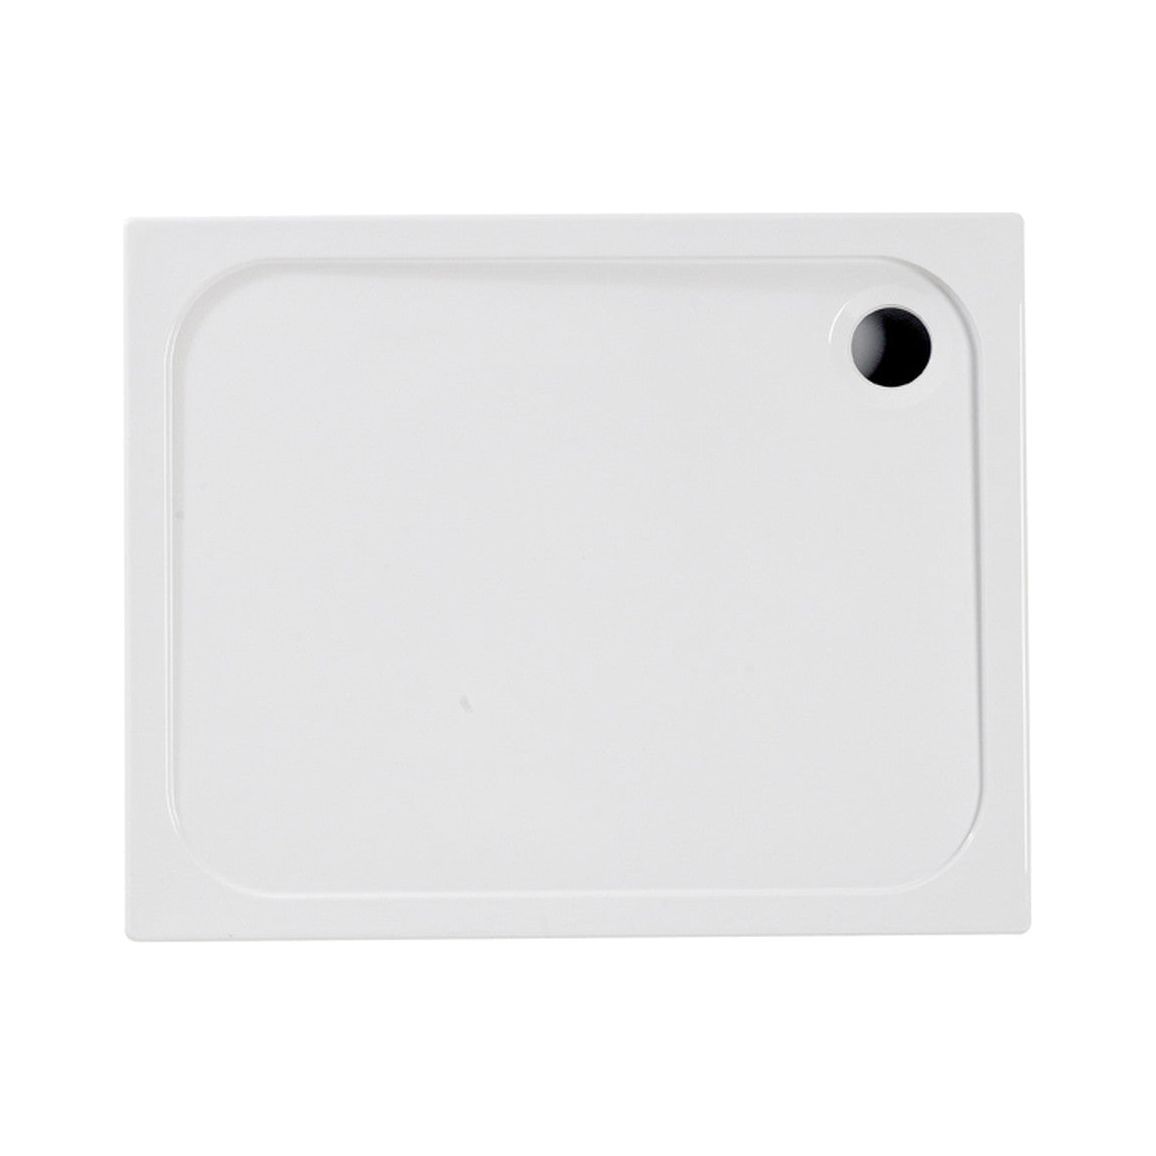 45mm Low Profile 1600x900mm Rectangular Tray & Waste